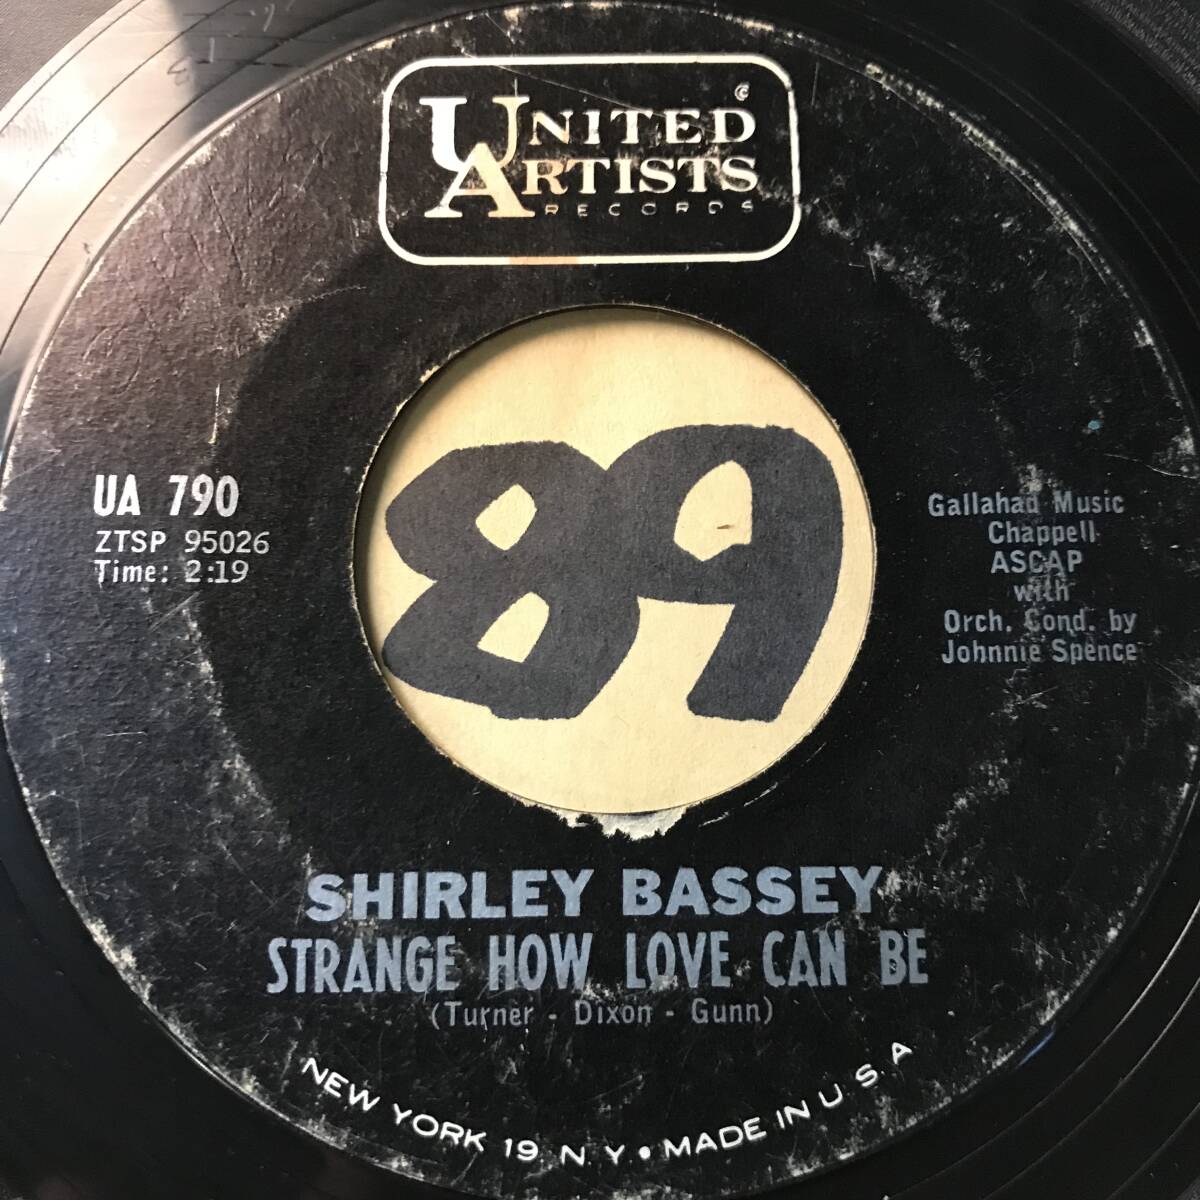  audition 007 soundtrack SHIRLEY BASSEY GOLDFINGER both sides VG(+) POP-EYE THE MUSIC NETWORK mulberry .. one 